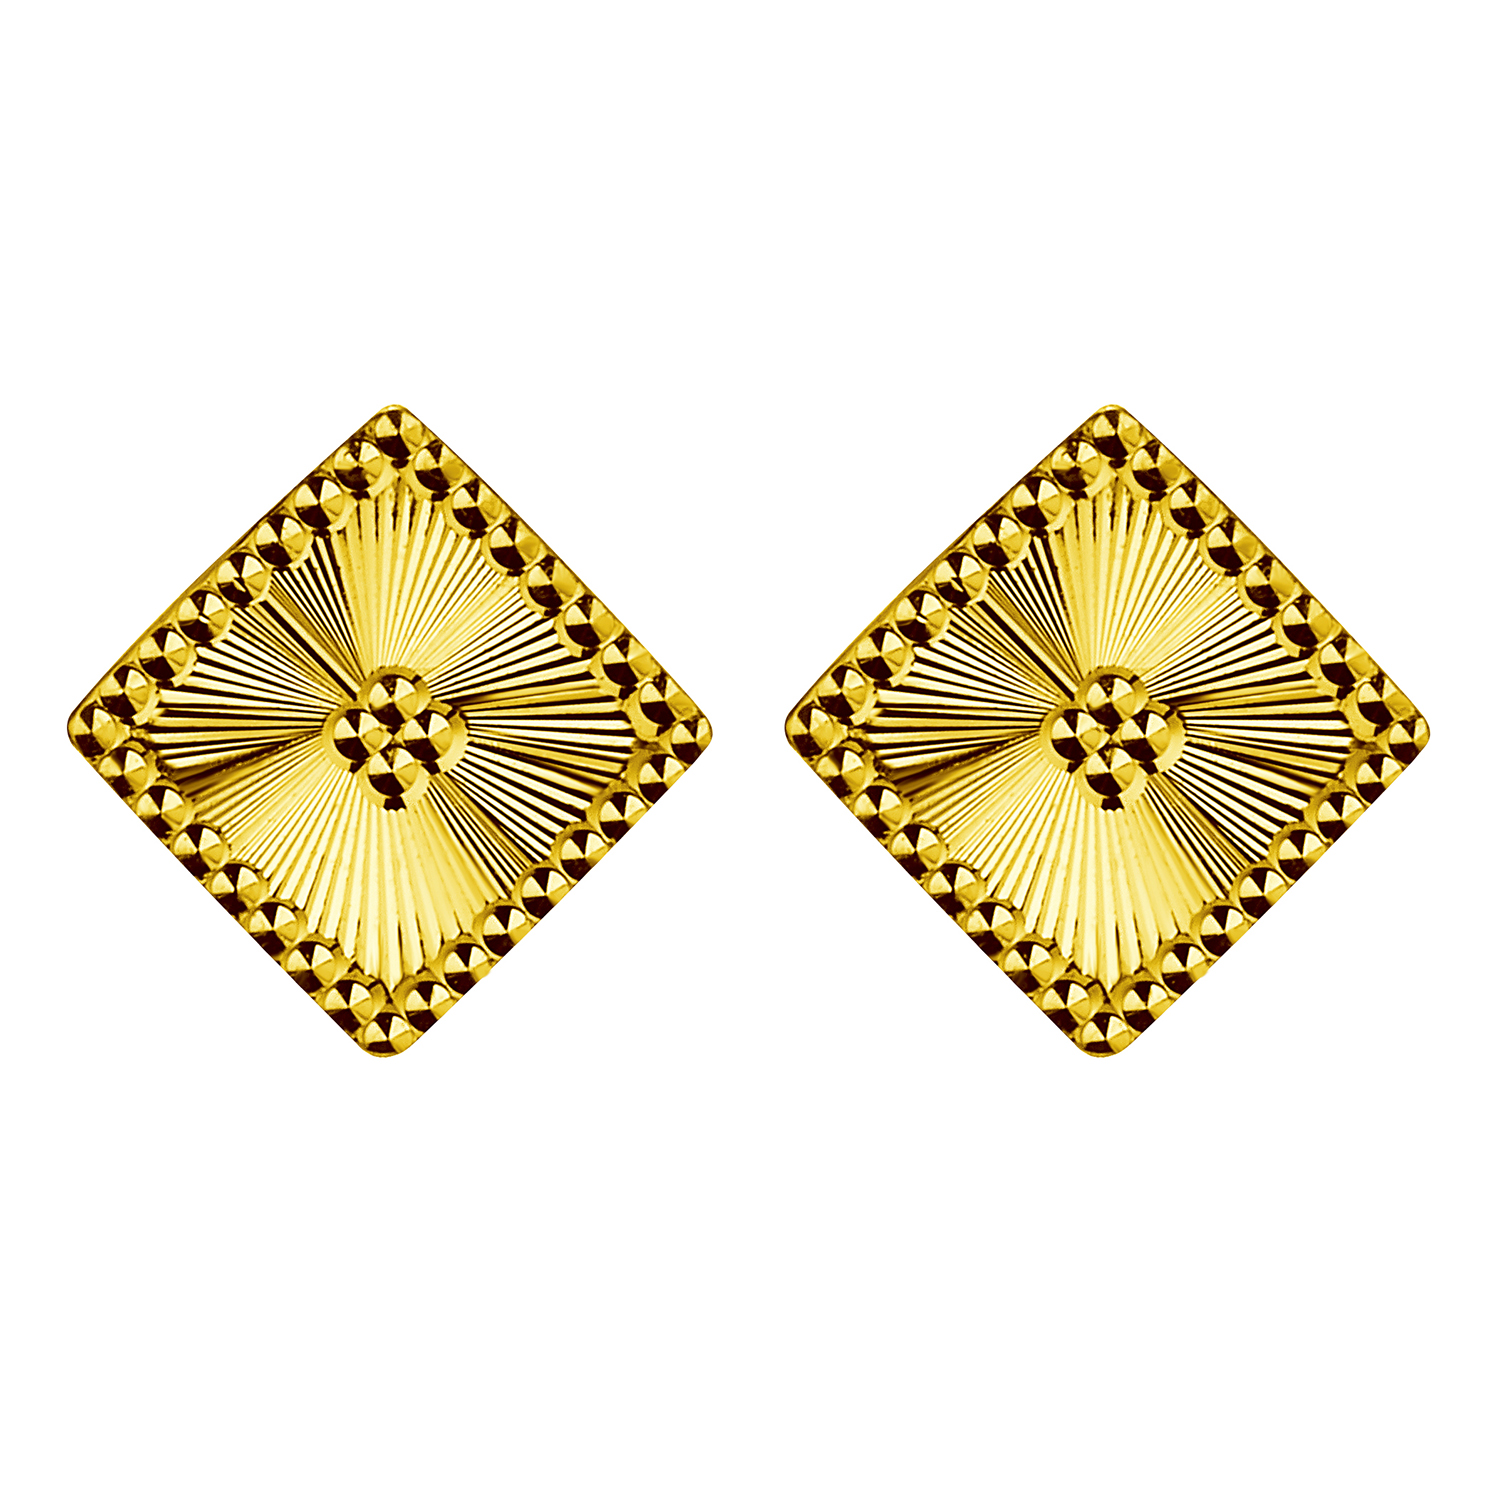 Goldstyle “Game of Life” Square Gold Earrings